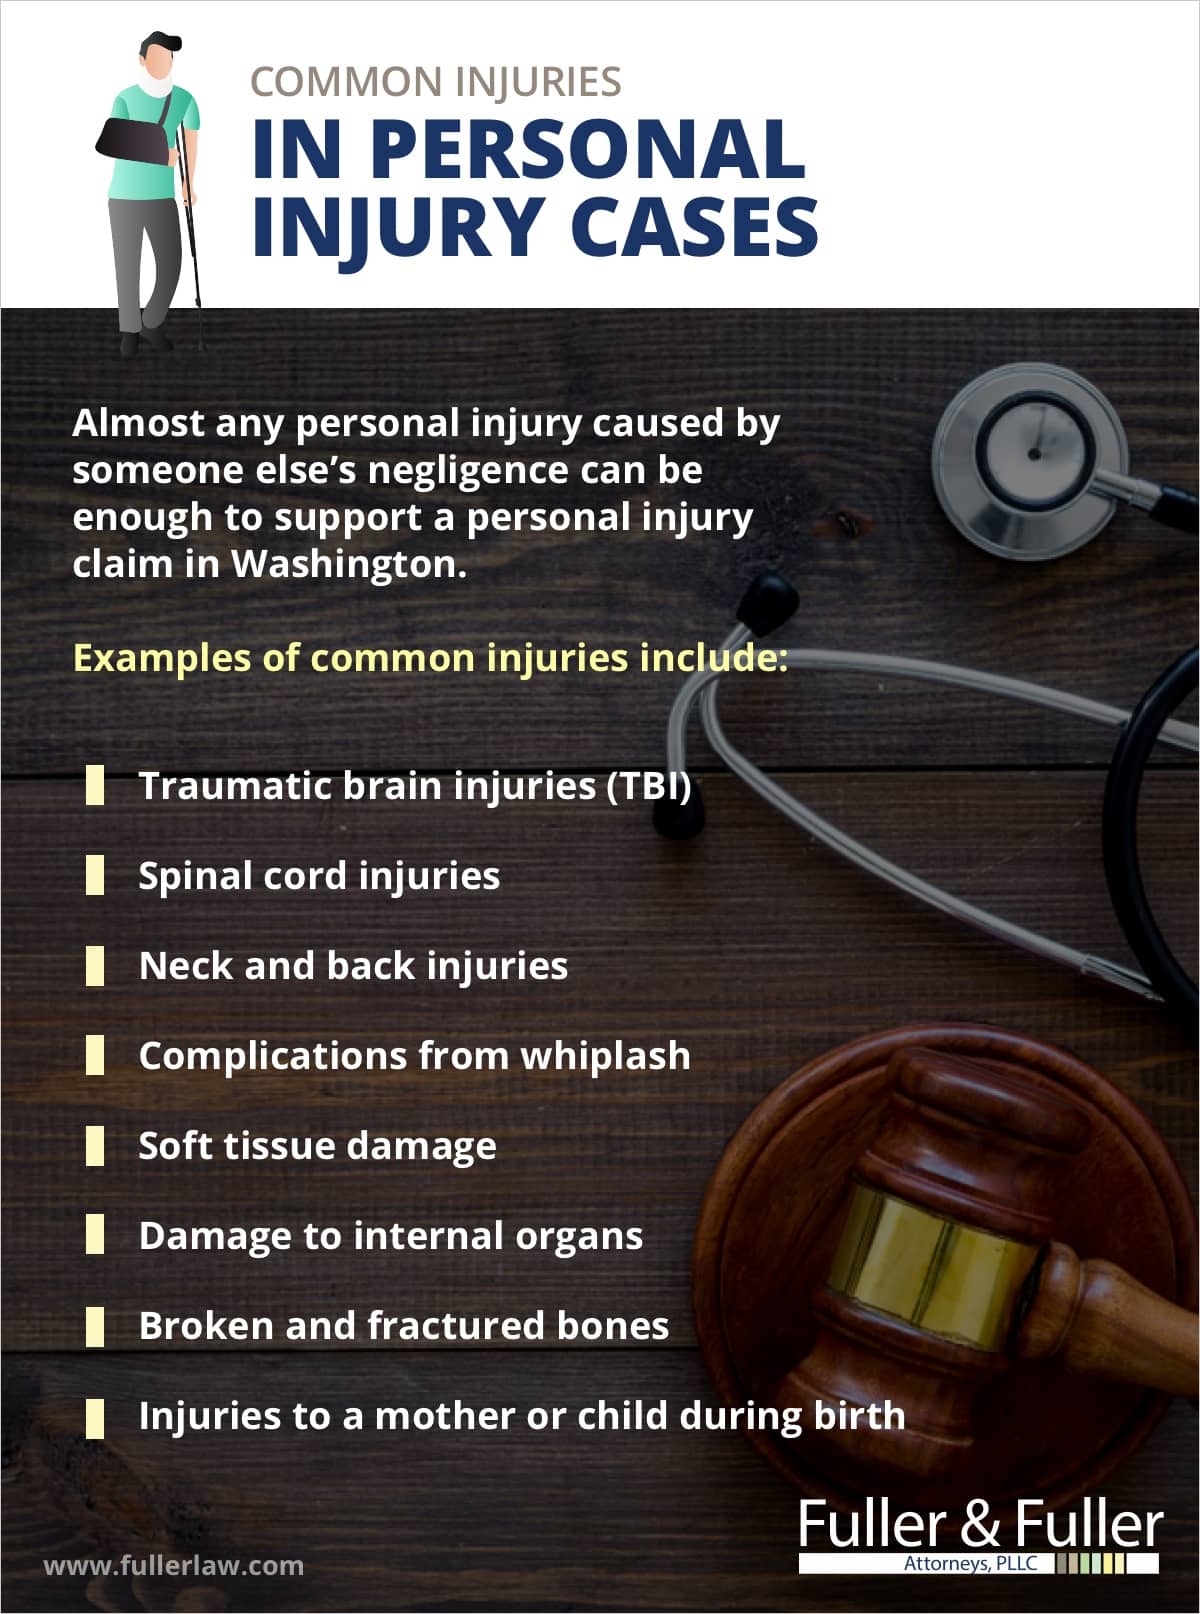 Common Injuries in Personal Injury Cases